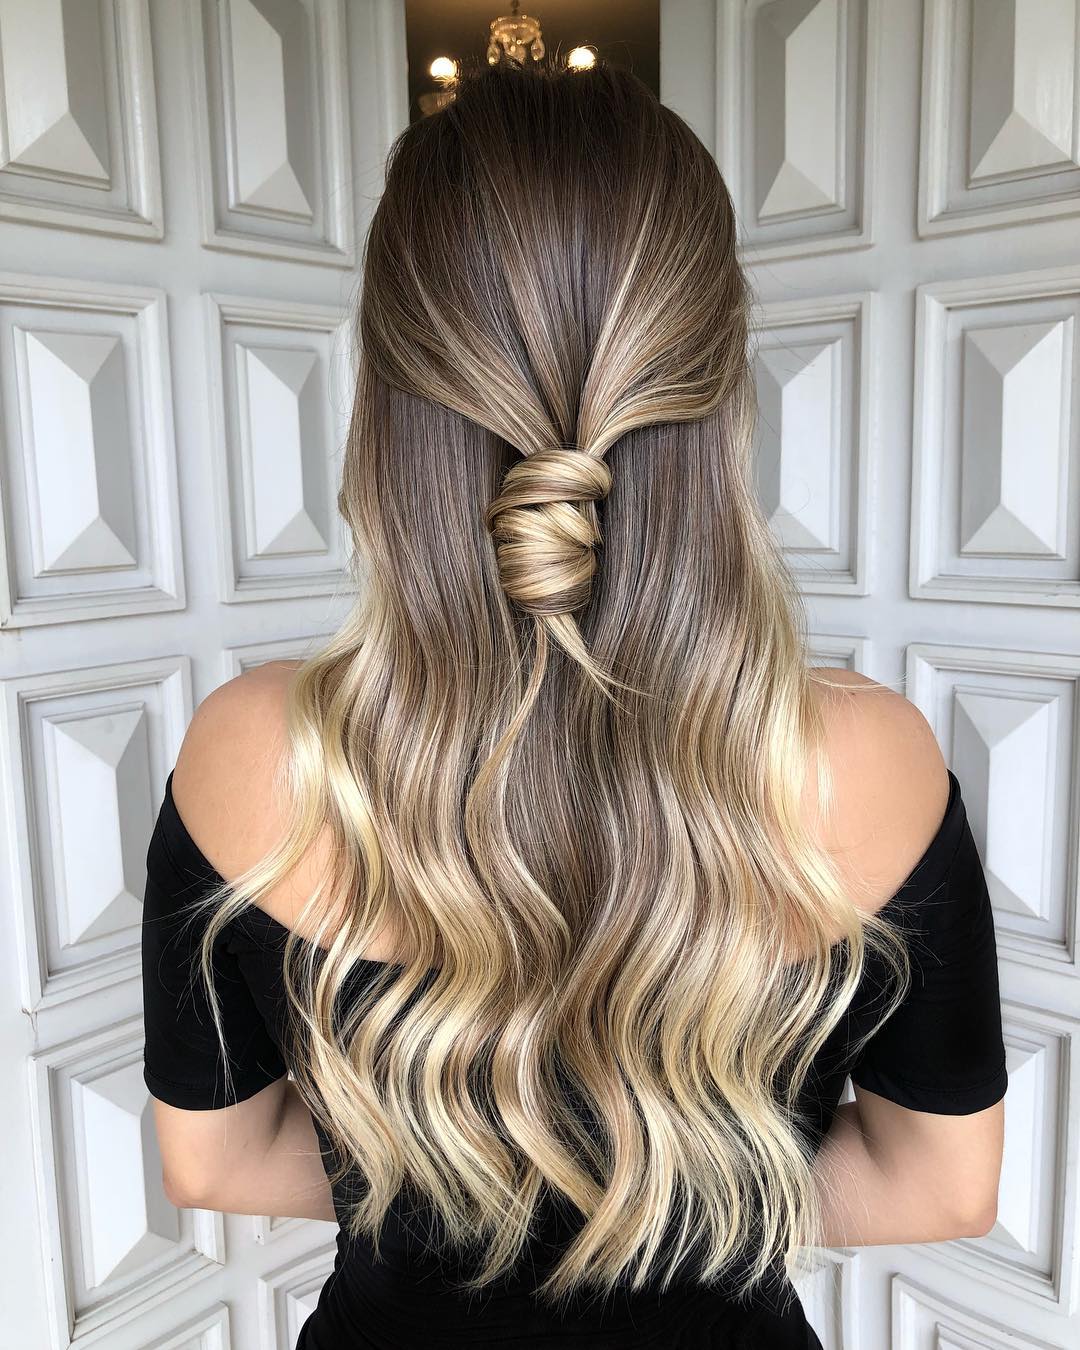 50 Hottest Ombre Hair Color Ideas for 2019 – Ombre Hairstyles | Styles